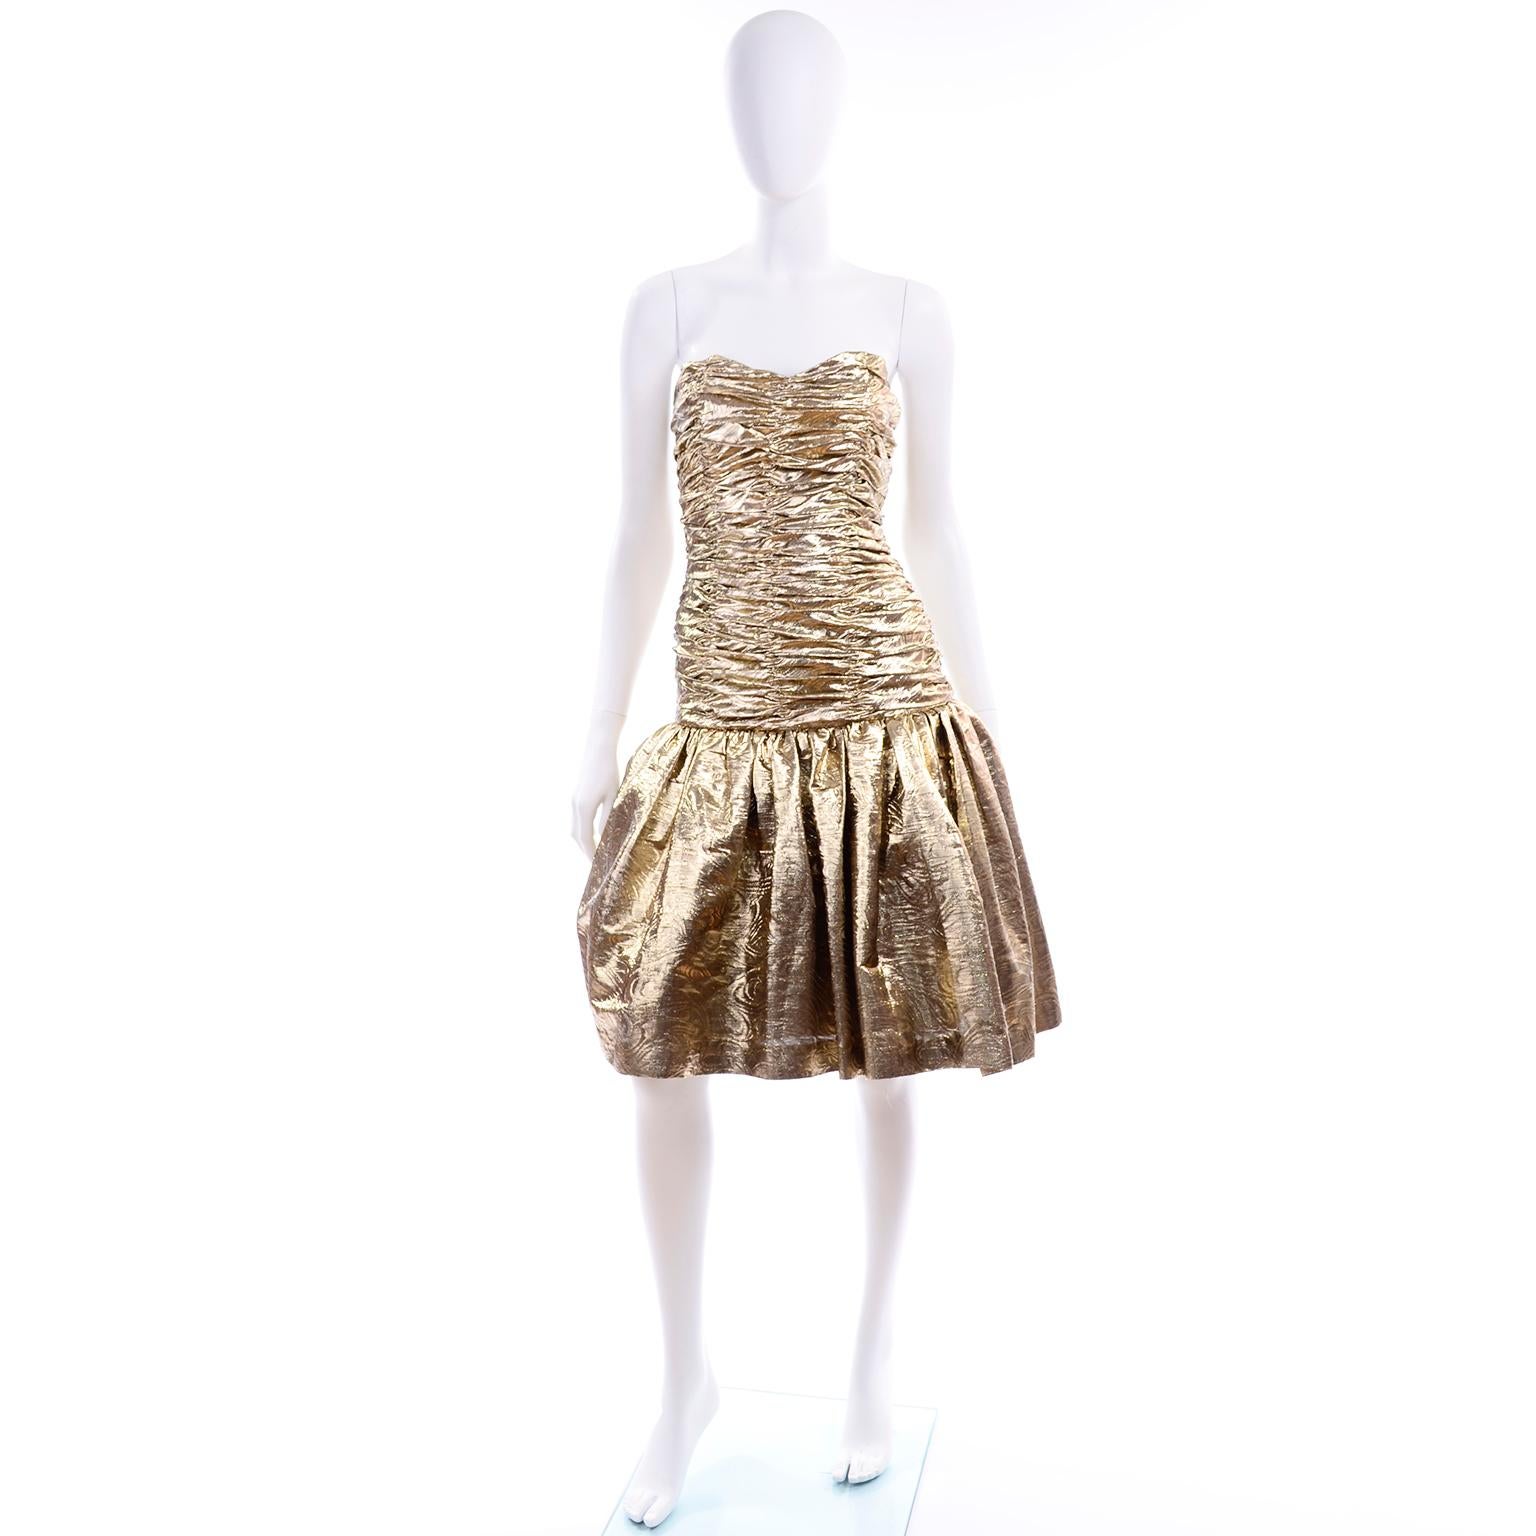 This is a fun vintage textured gold lurex strapless cocktail or party dress from the 1980's. The drop waist bodice is fully ruched and the skirt is lined with a tulle underskirt for fullness.  The dress is fully lined in satin and closes with a back